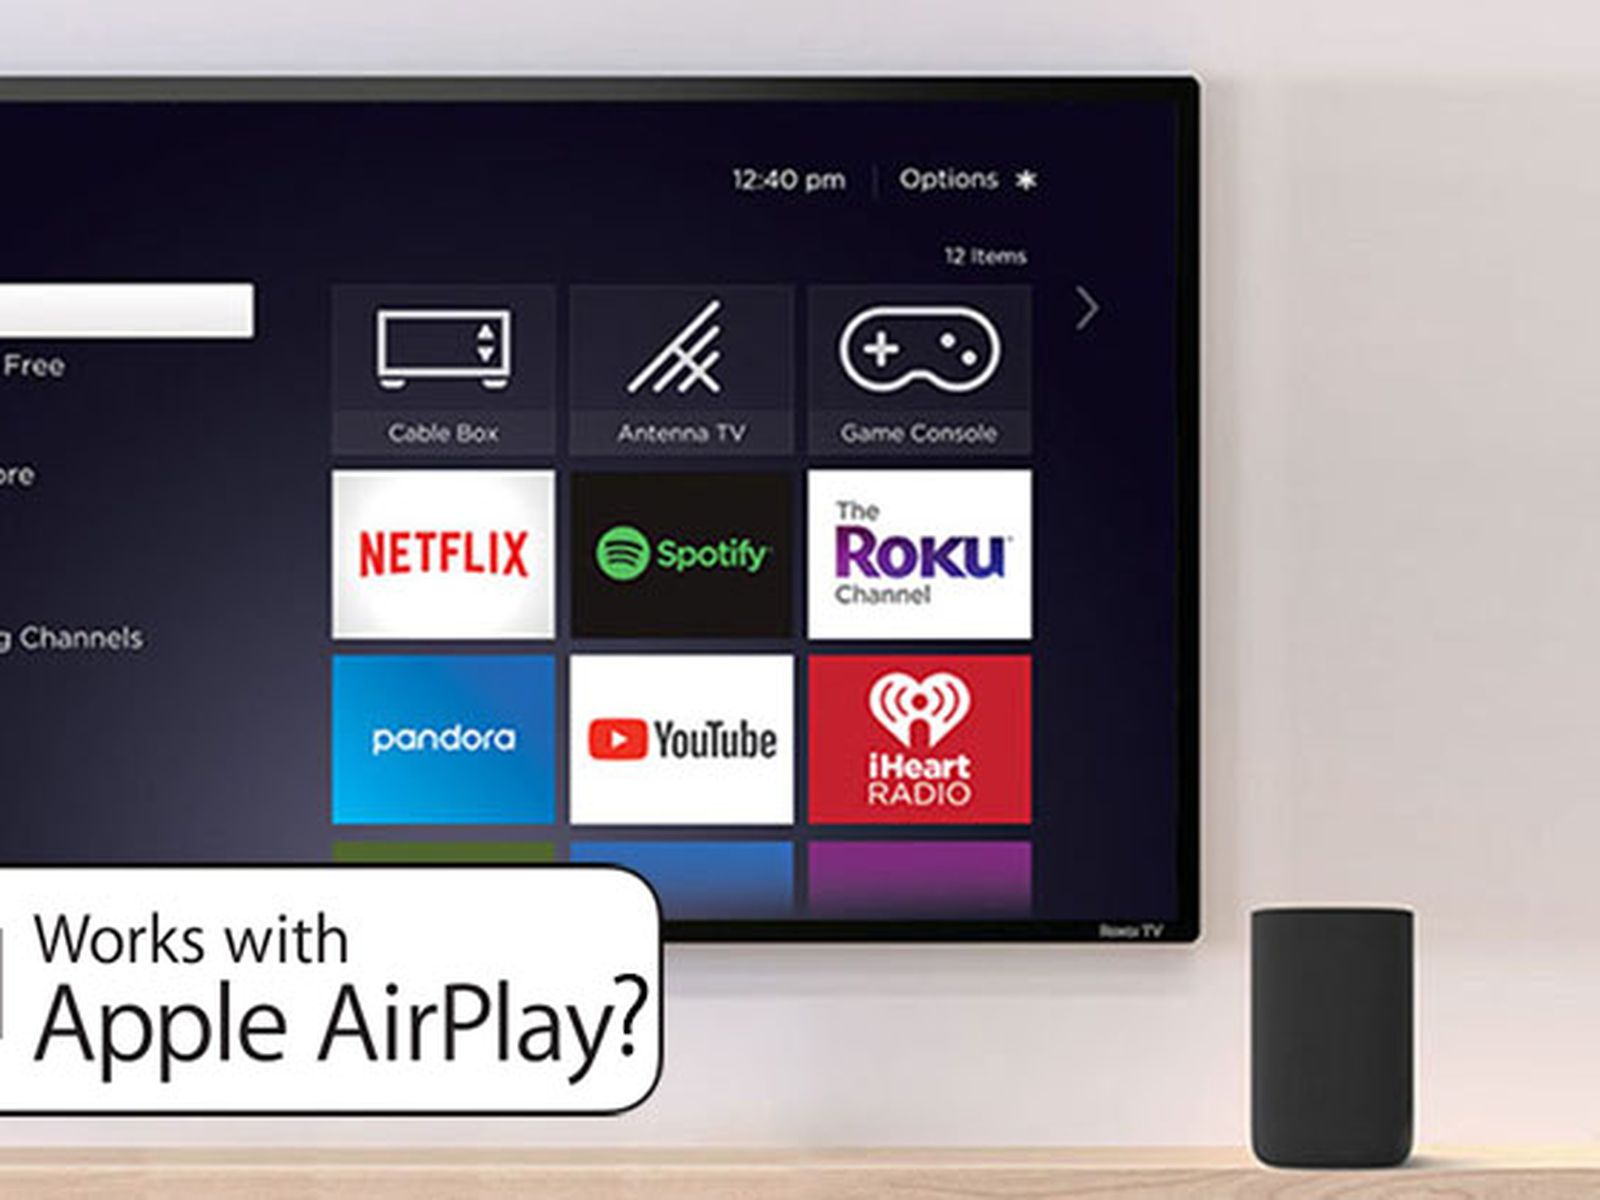 Roku Talks With Apple AirPlay Support - MacRumors